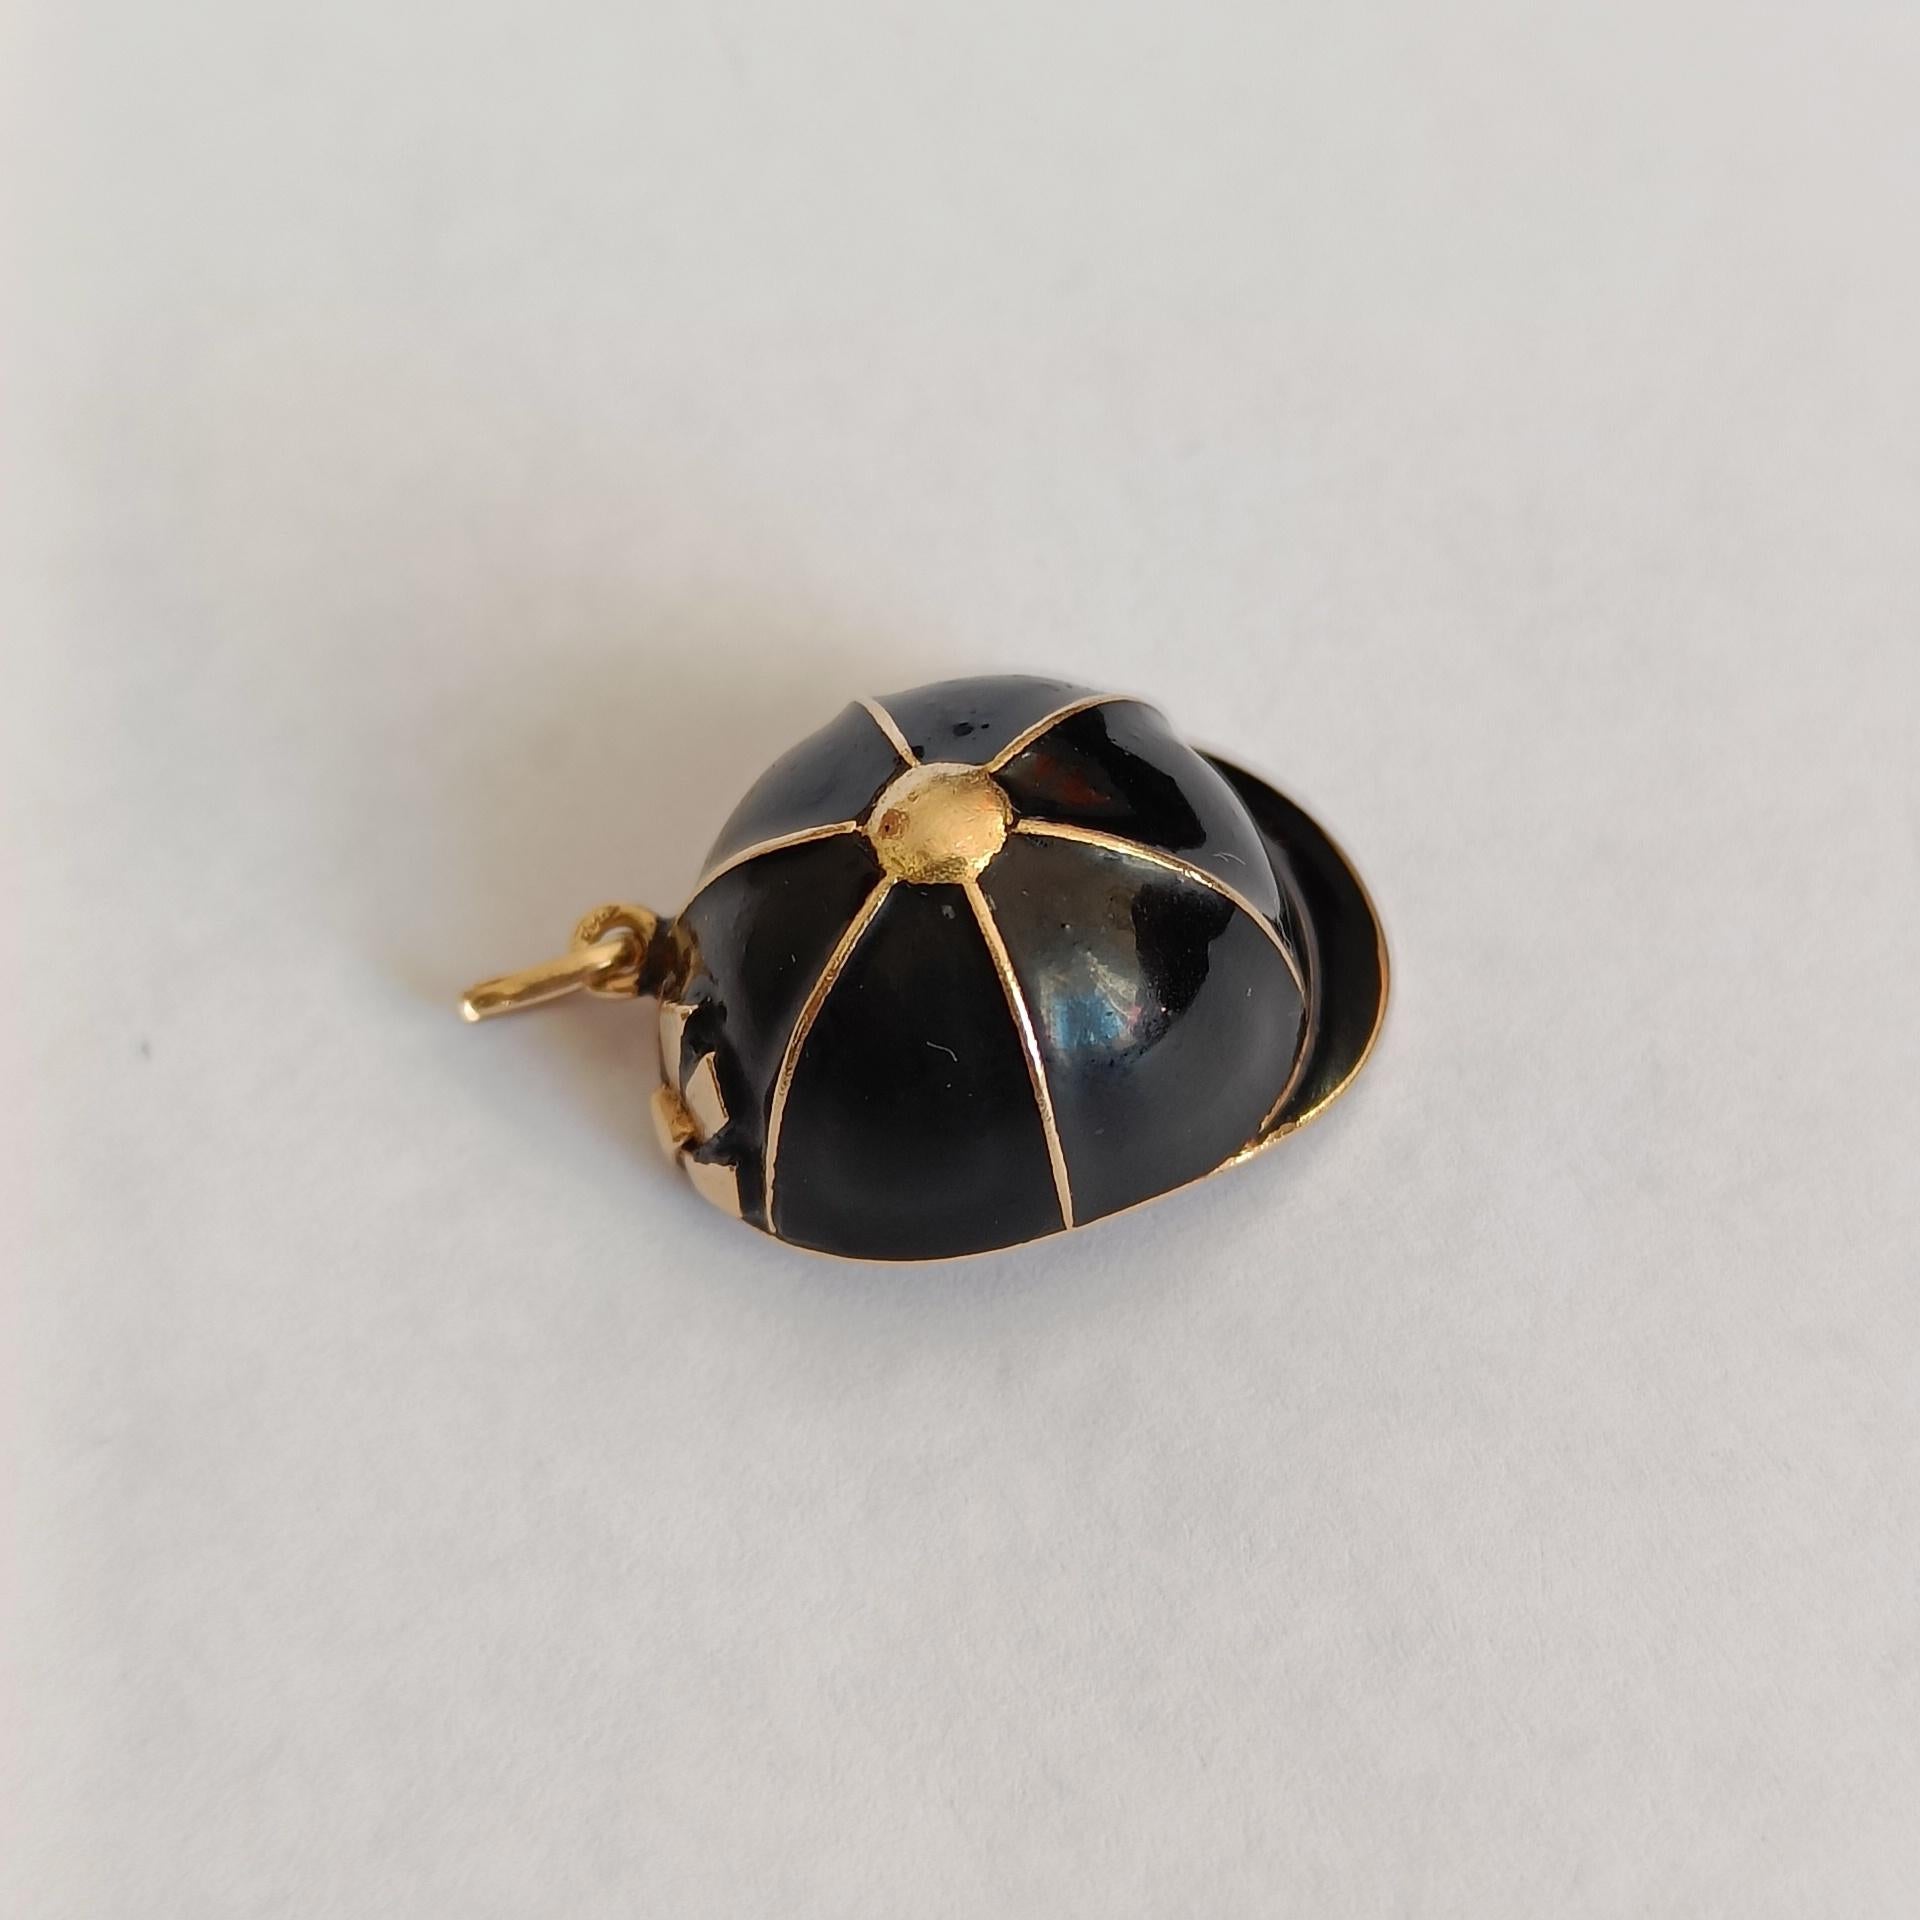 Rare vintage charm / pendant by Hermes. 18k yellow gold (tested) and black enamel. 

Signed Hermes Paris and numered 24/27. Some indistinct marks.

Good condition.

Length 2.1 cm
Weight 3.8 grams
